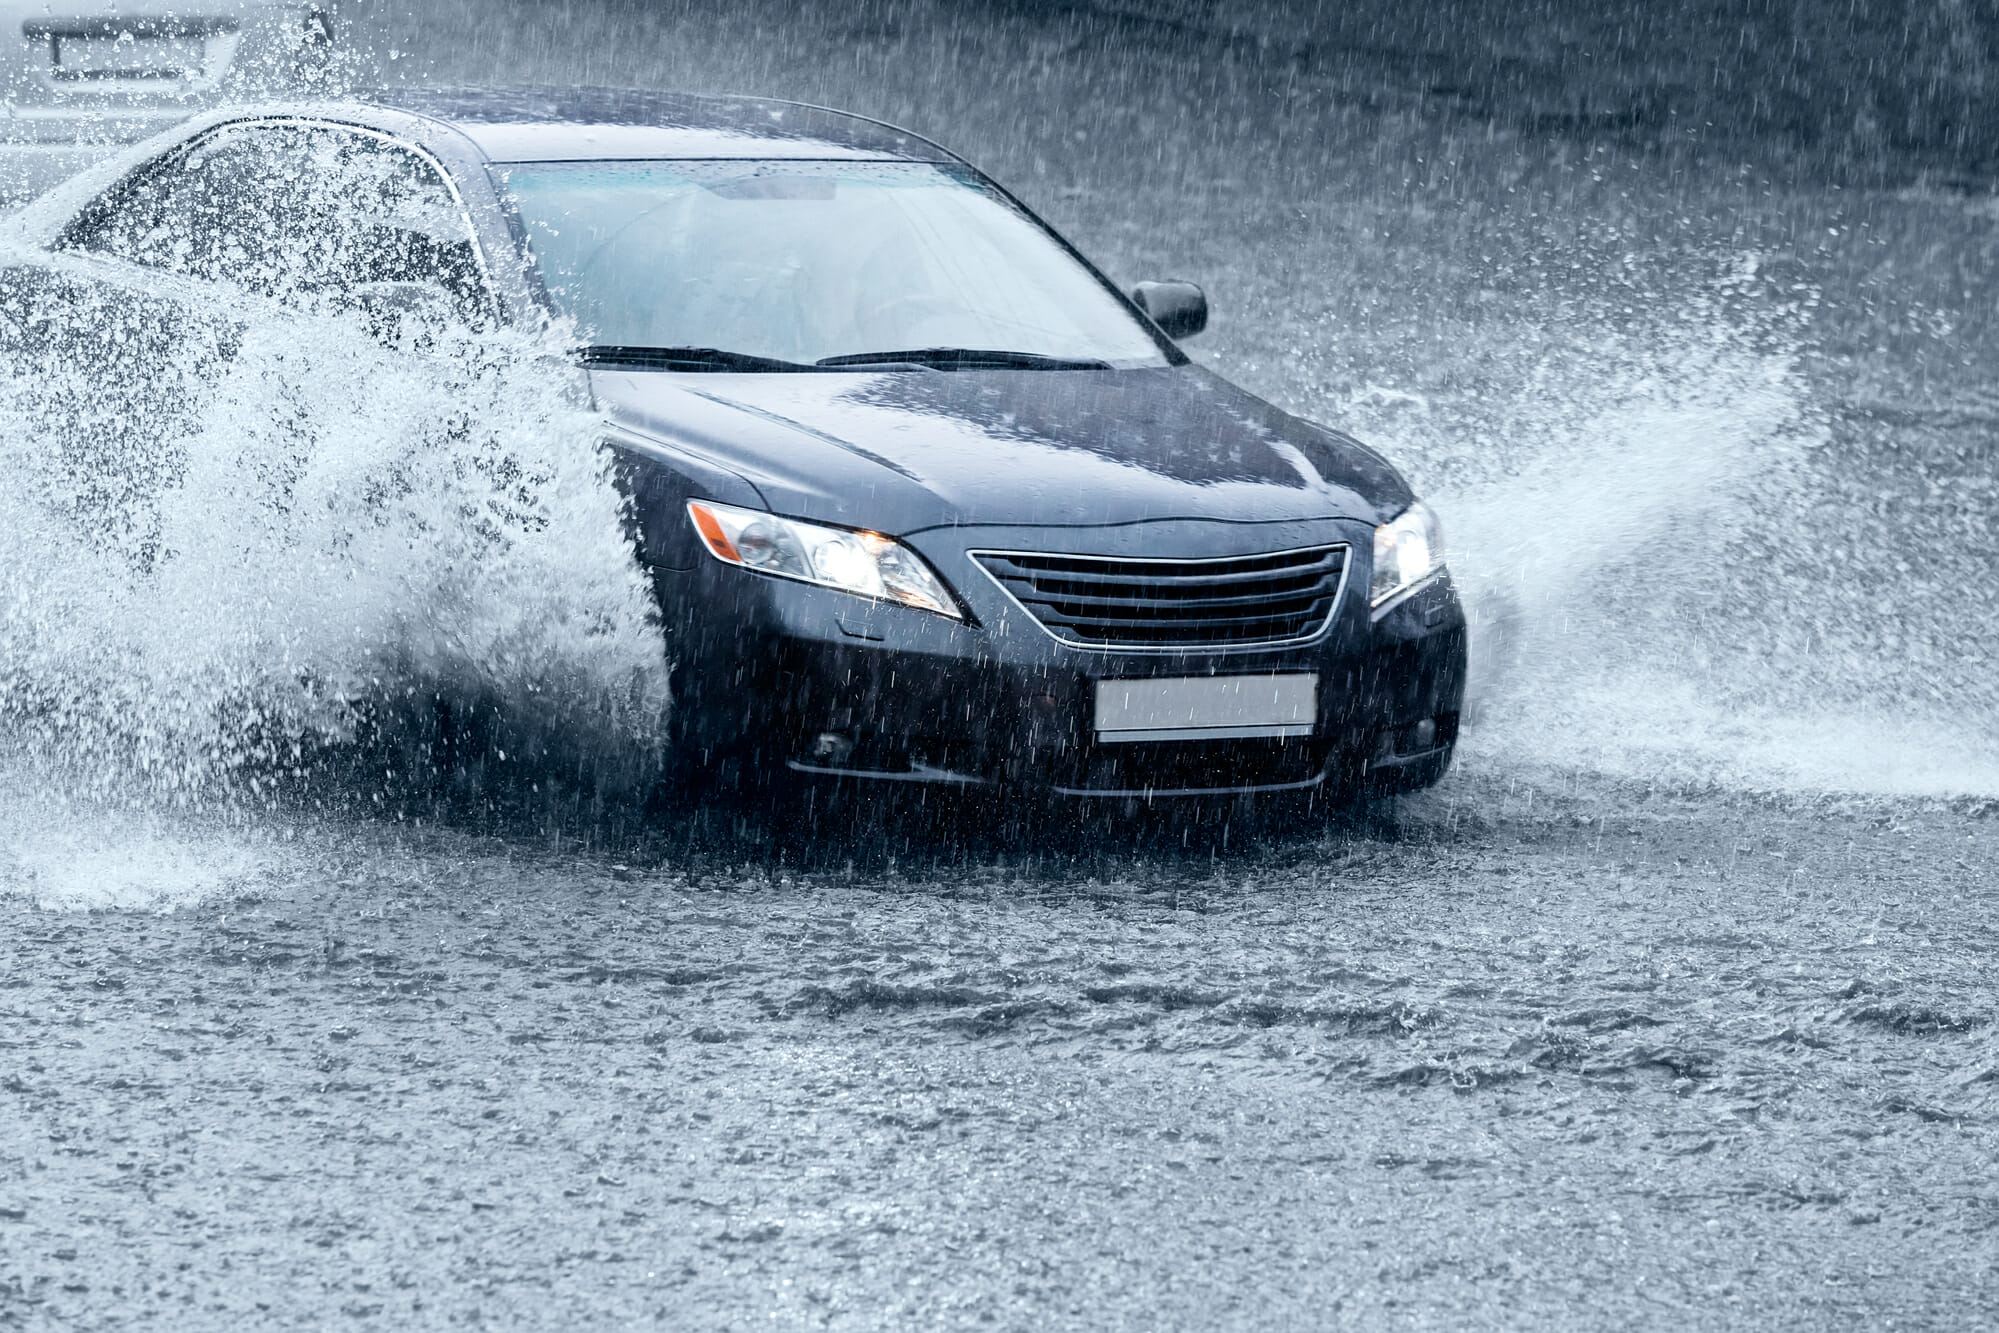 Why It’s Dumb to Drive Through Water